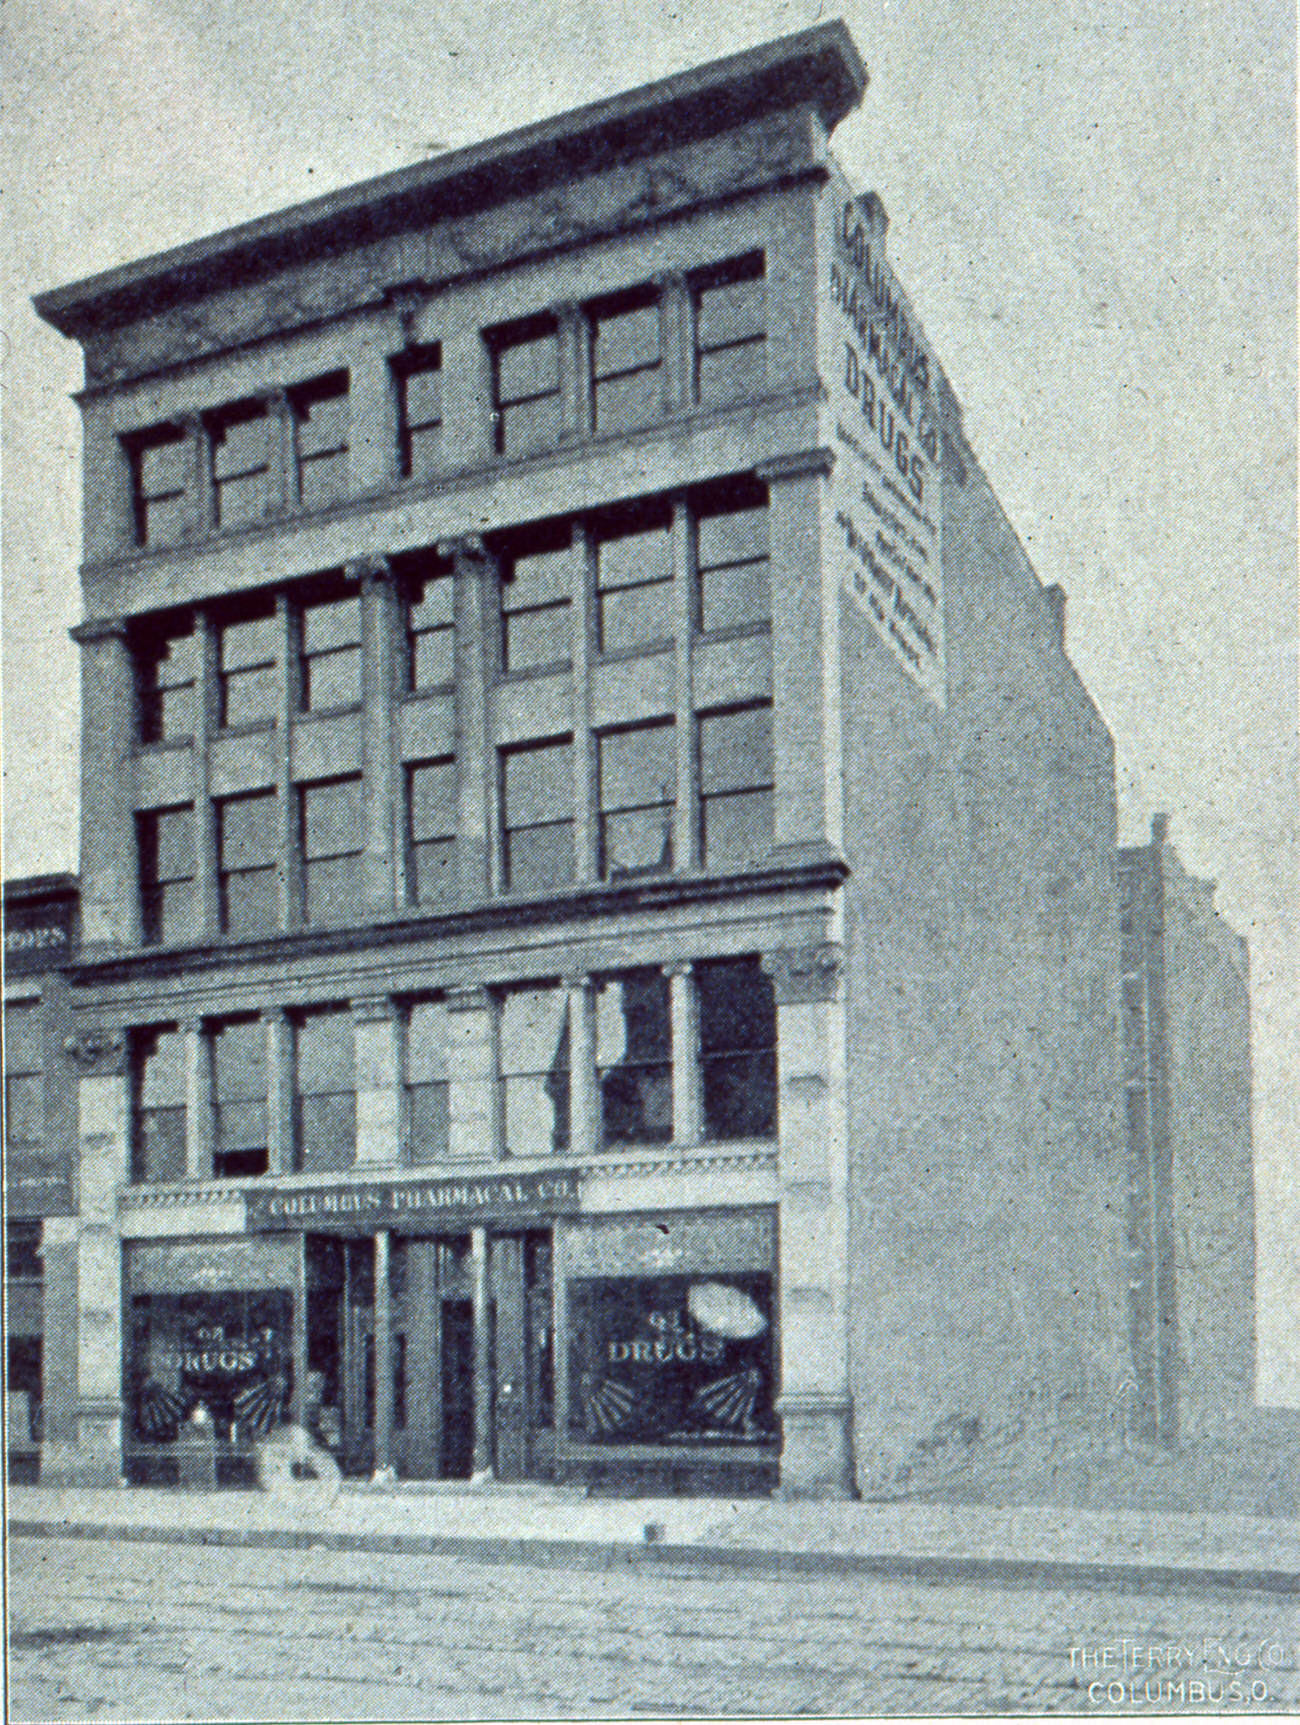 Columbus Pharmacal Company building, a medical equipment supplier, 1898.